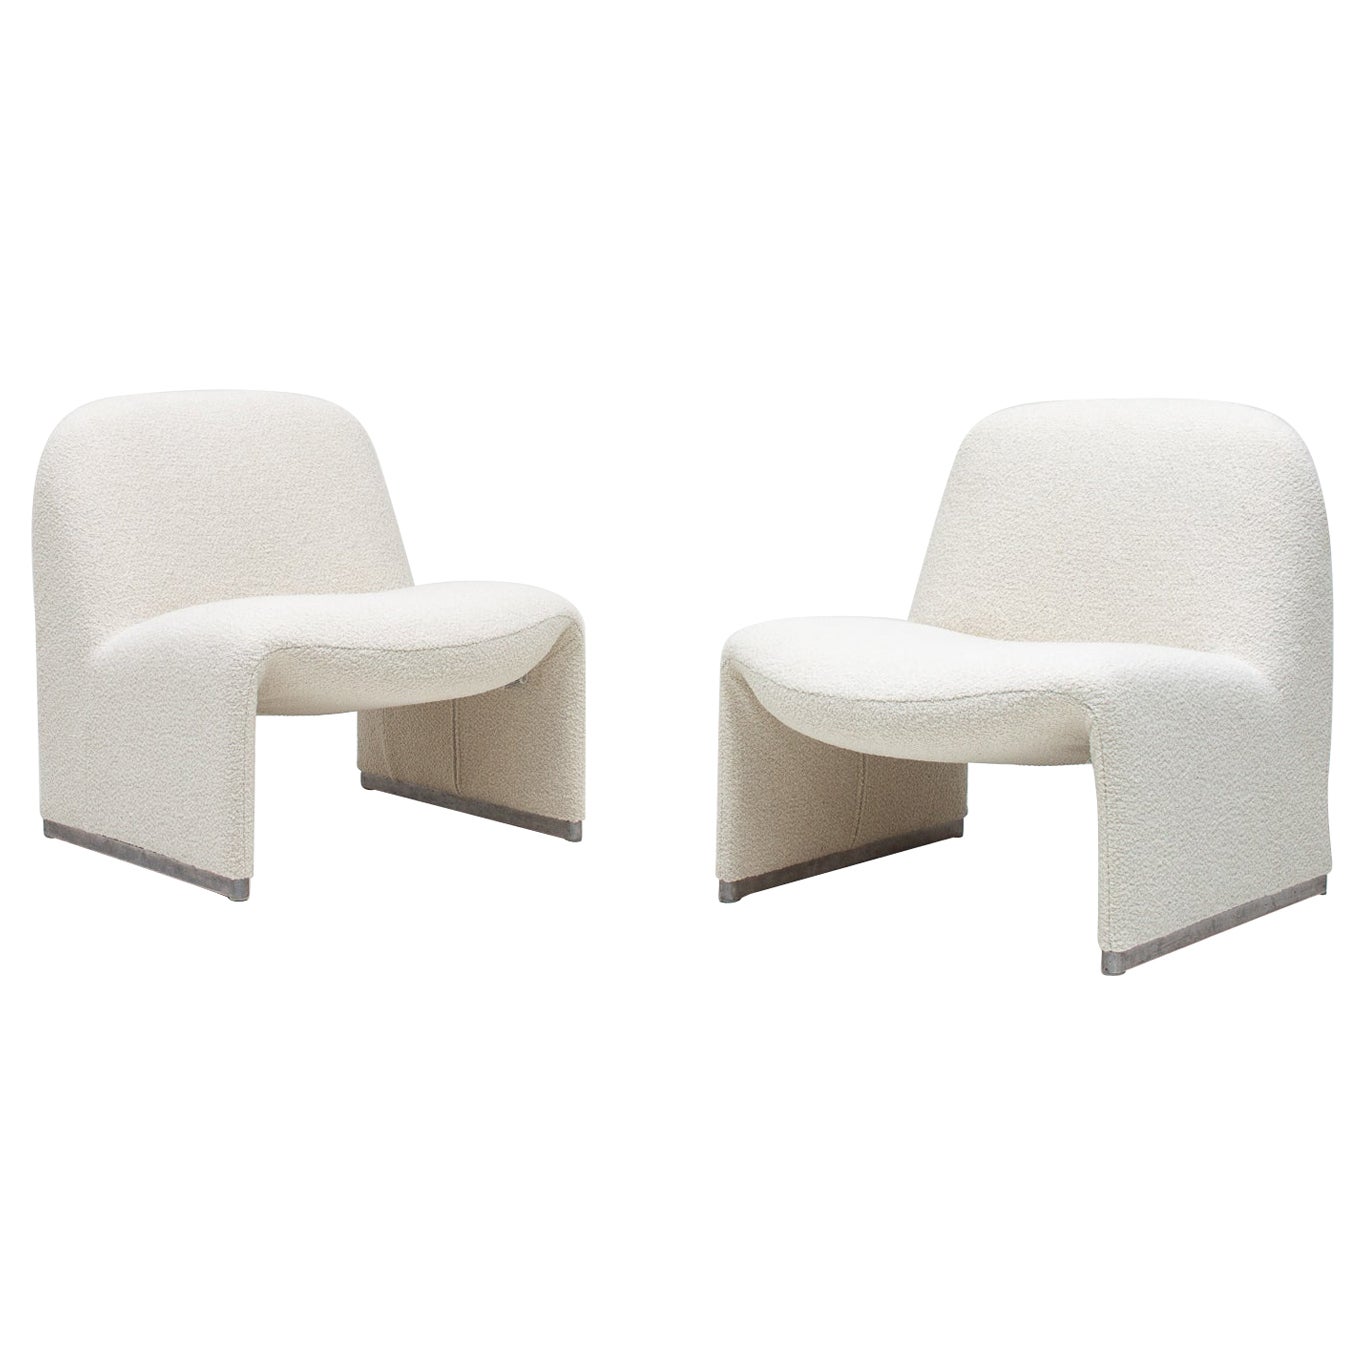 Giancarlo Piretti Alky Chairs In Yarn Collective bouclé *Personnalisable*